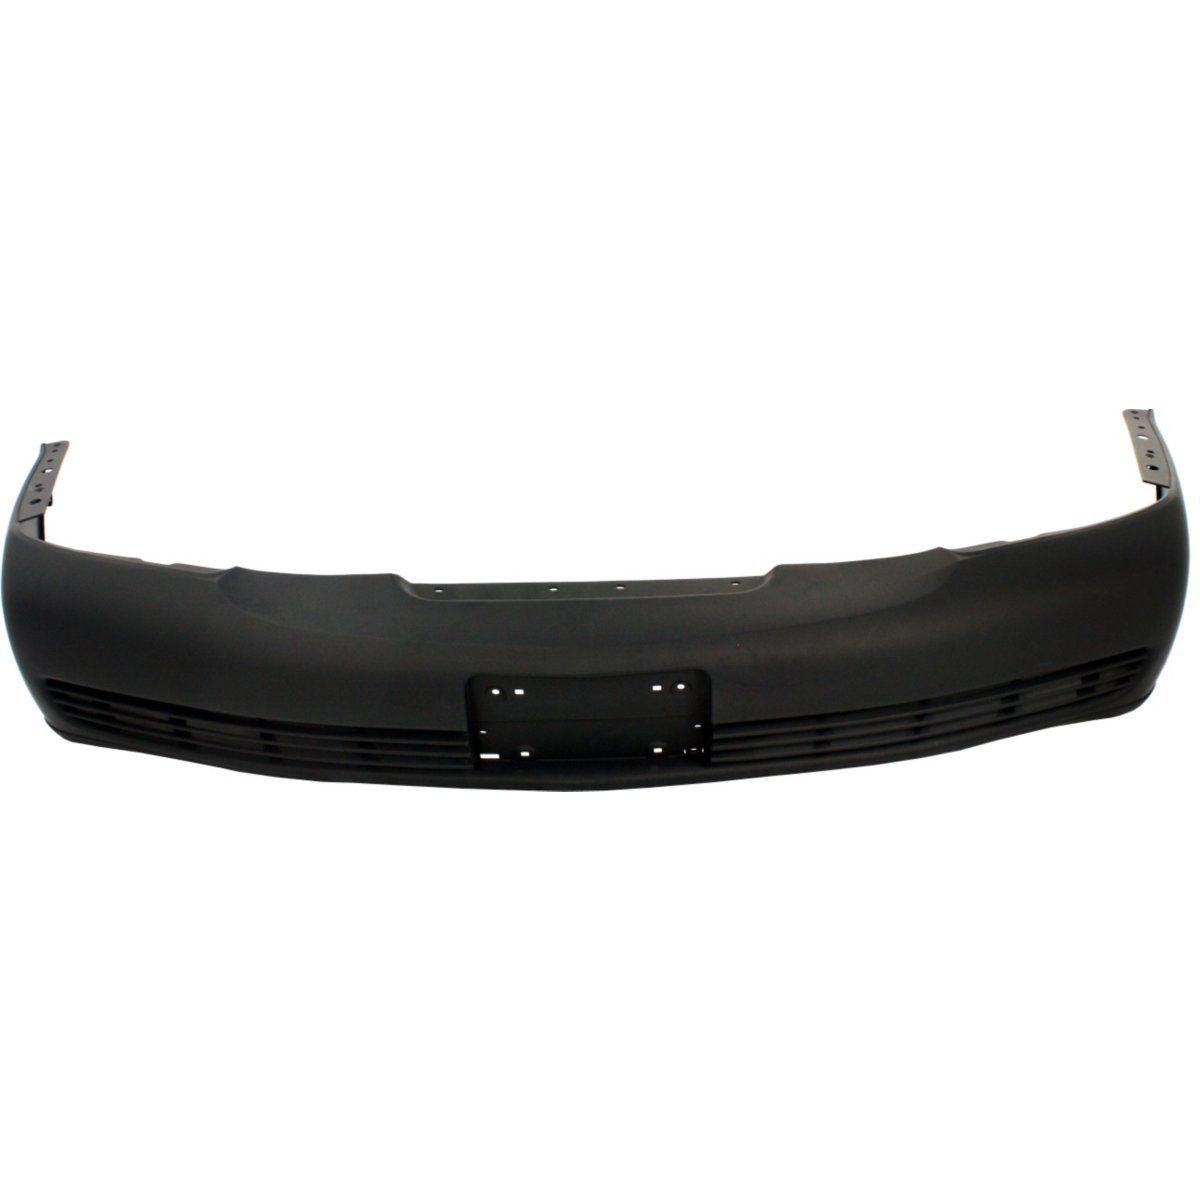 2000-2005 CADILLAC DEVILLE Front Bumper Cover base Luxury  w/o Fog Lamps Painted to Match